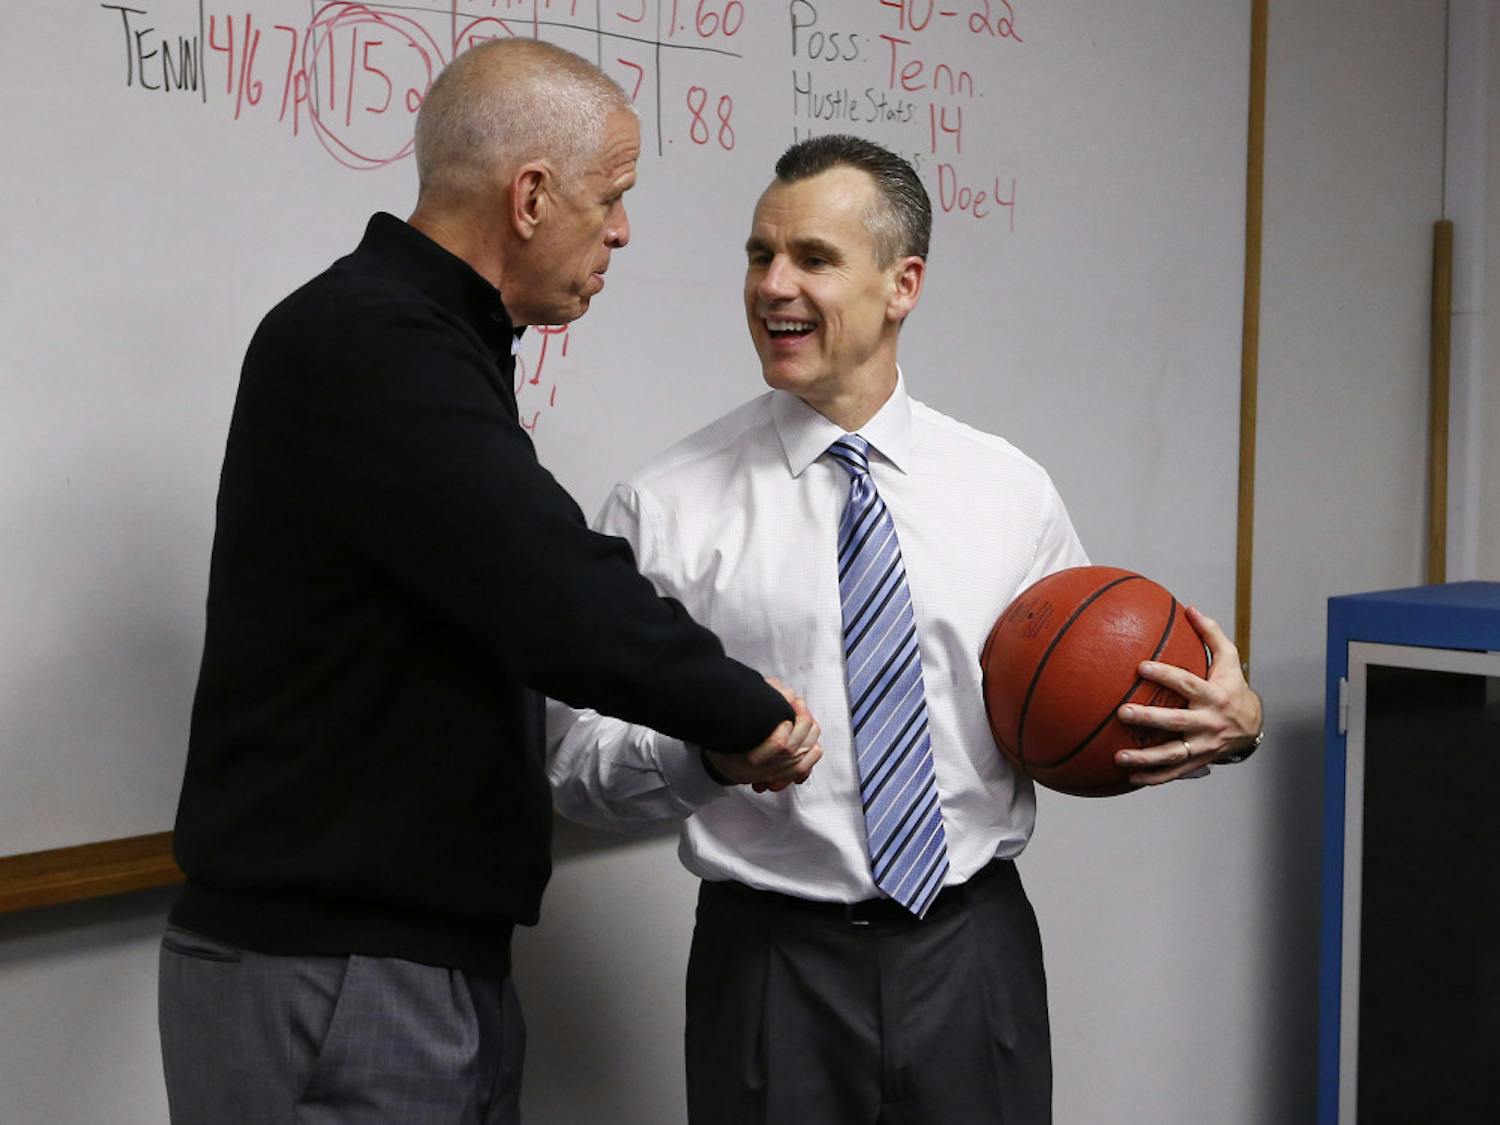 Jeremy Foley shakes hands with Billy Donovan during the Gators' game against the Tennessee Volunteers on Saturday, February 28, 2015, at the Stephen C. O'Connell Center in Gainesville, FL / UAA Communications photo by Tim Casey